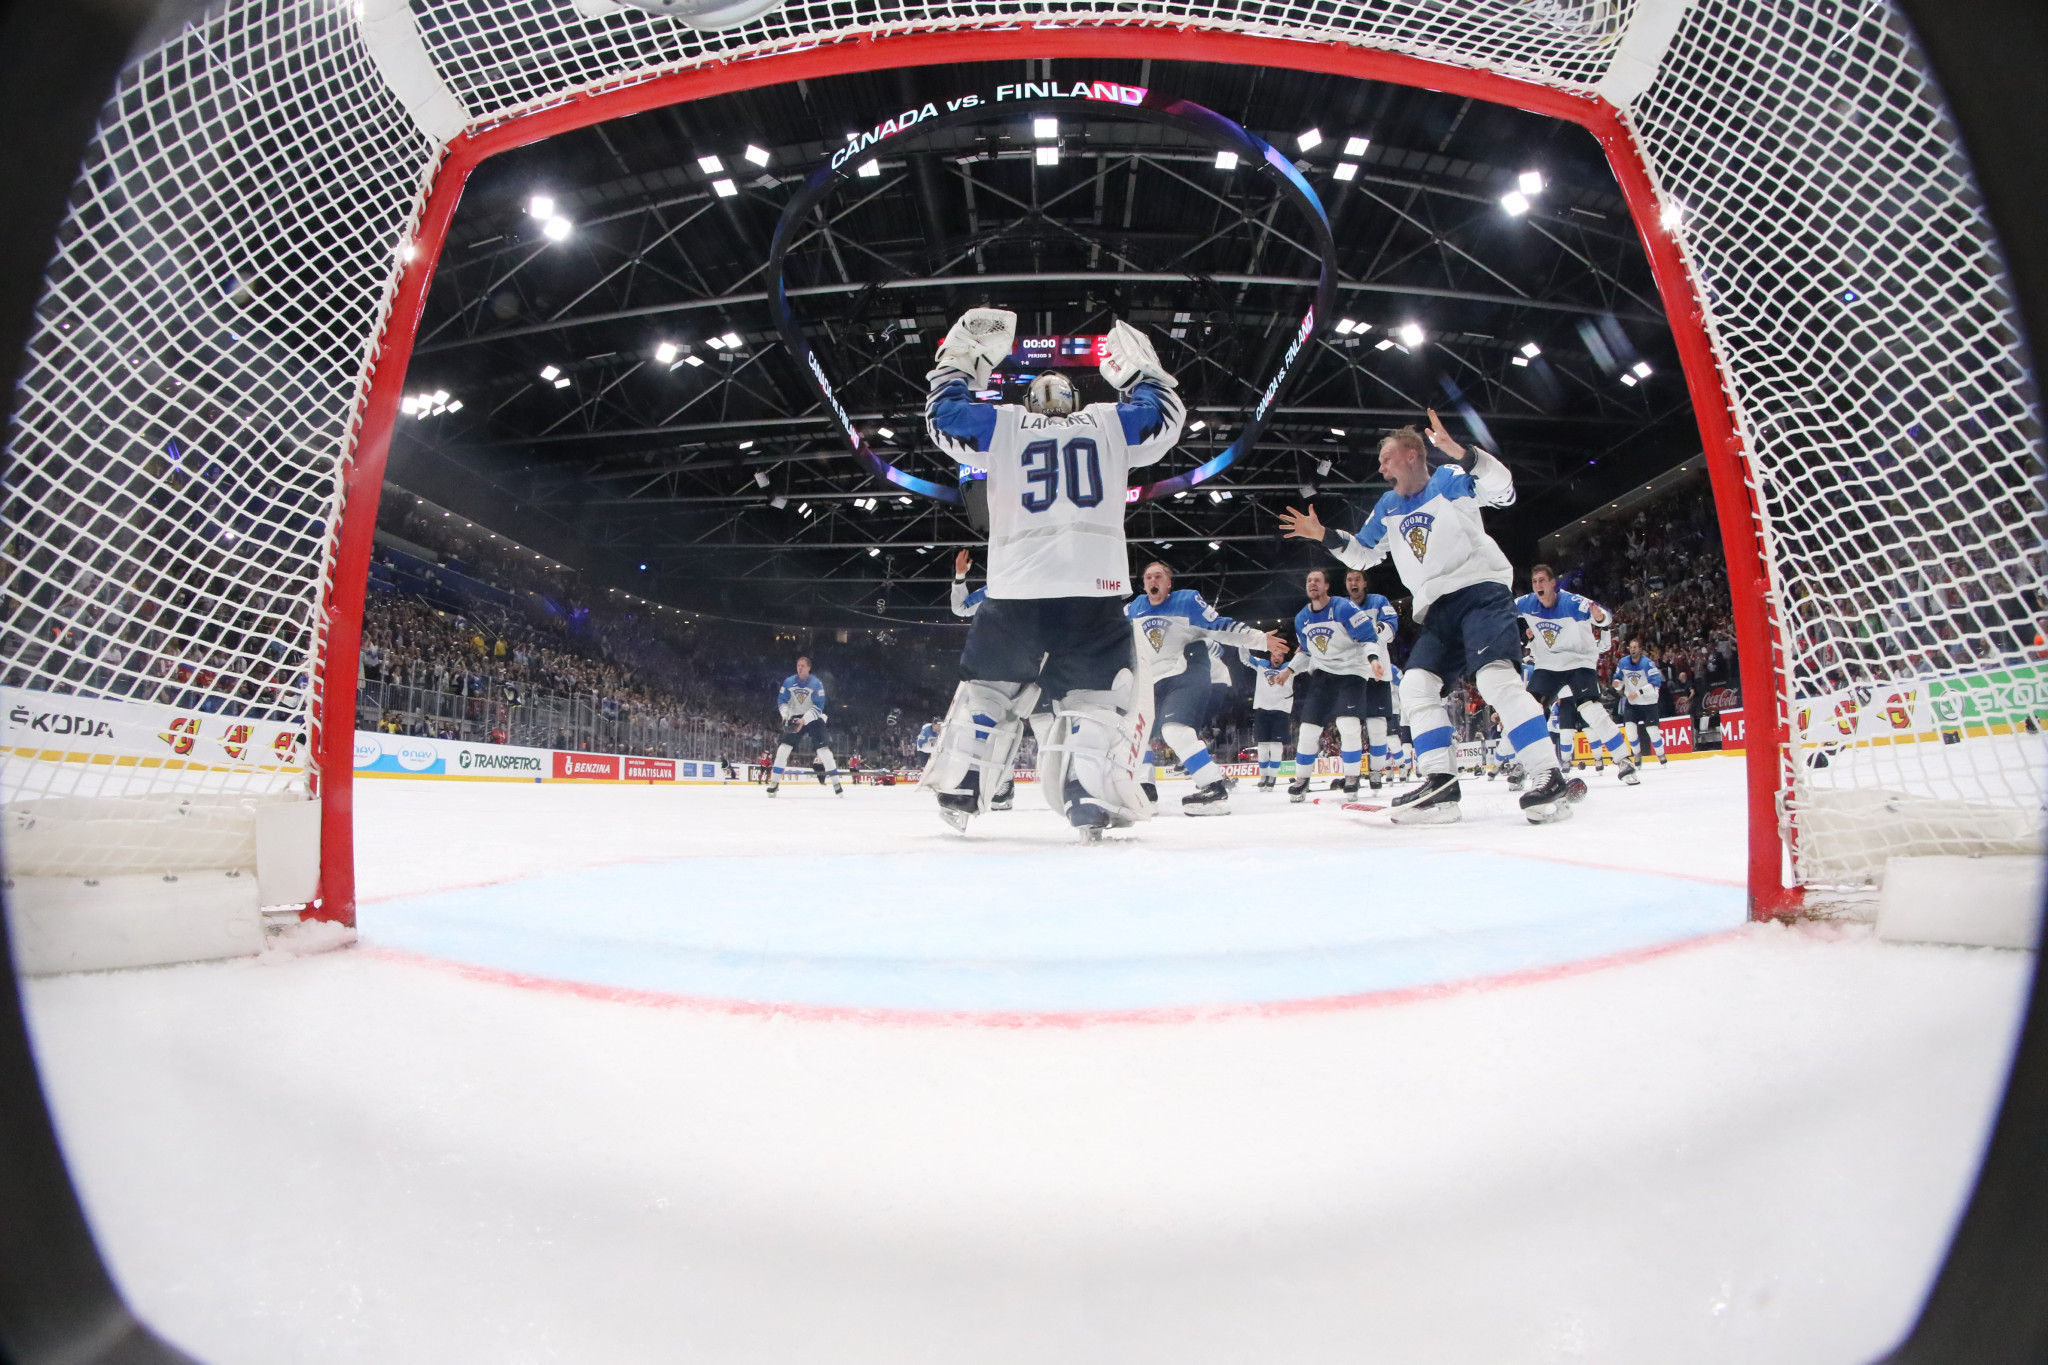 Finland will hope to defend their title at the World Championships ©Getty Images